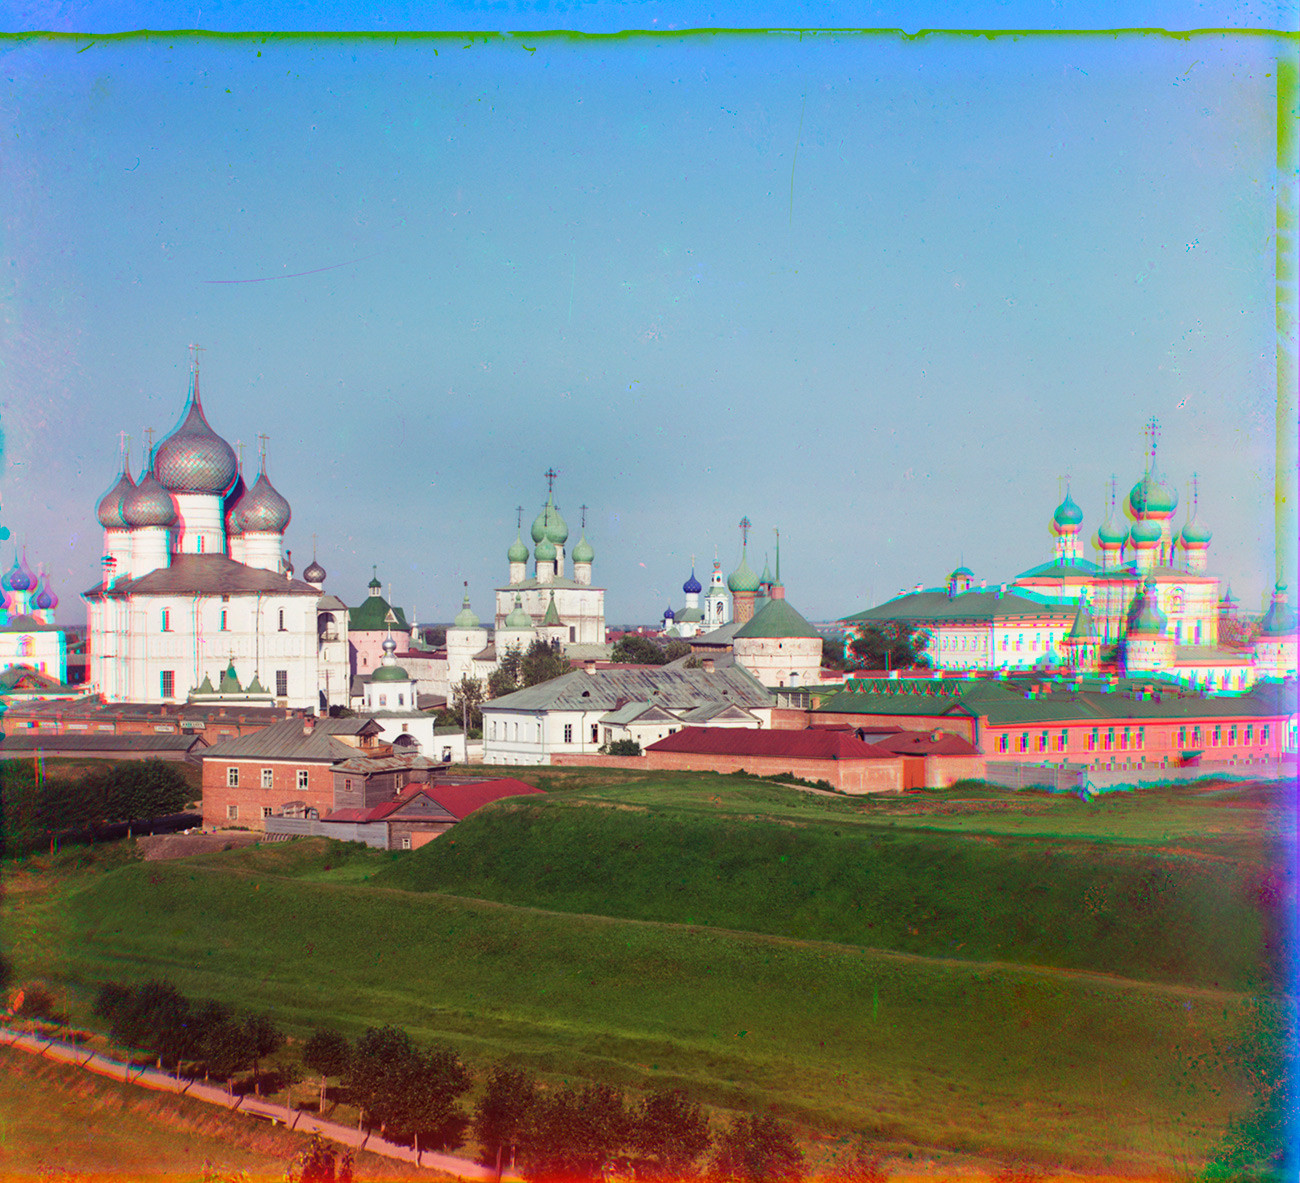 Rostov Kremlin. Northwest view from bell tower of All Saints Church (destroyed). From left: Dormition Cathedral, Church of Resurrection over North Gate, Church of St. John the Divine over West Gate. Summer 1911